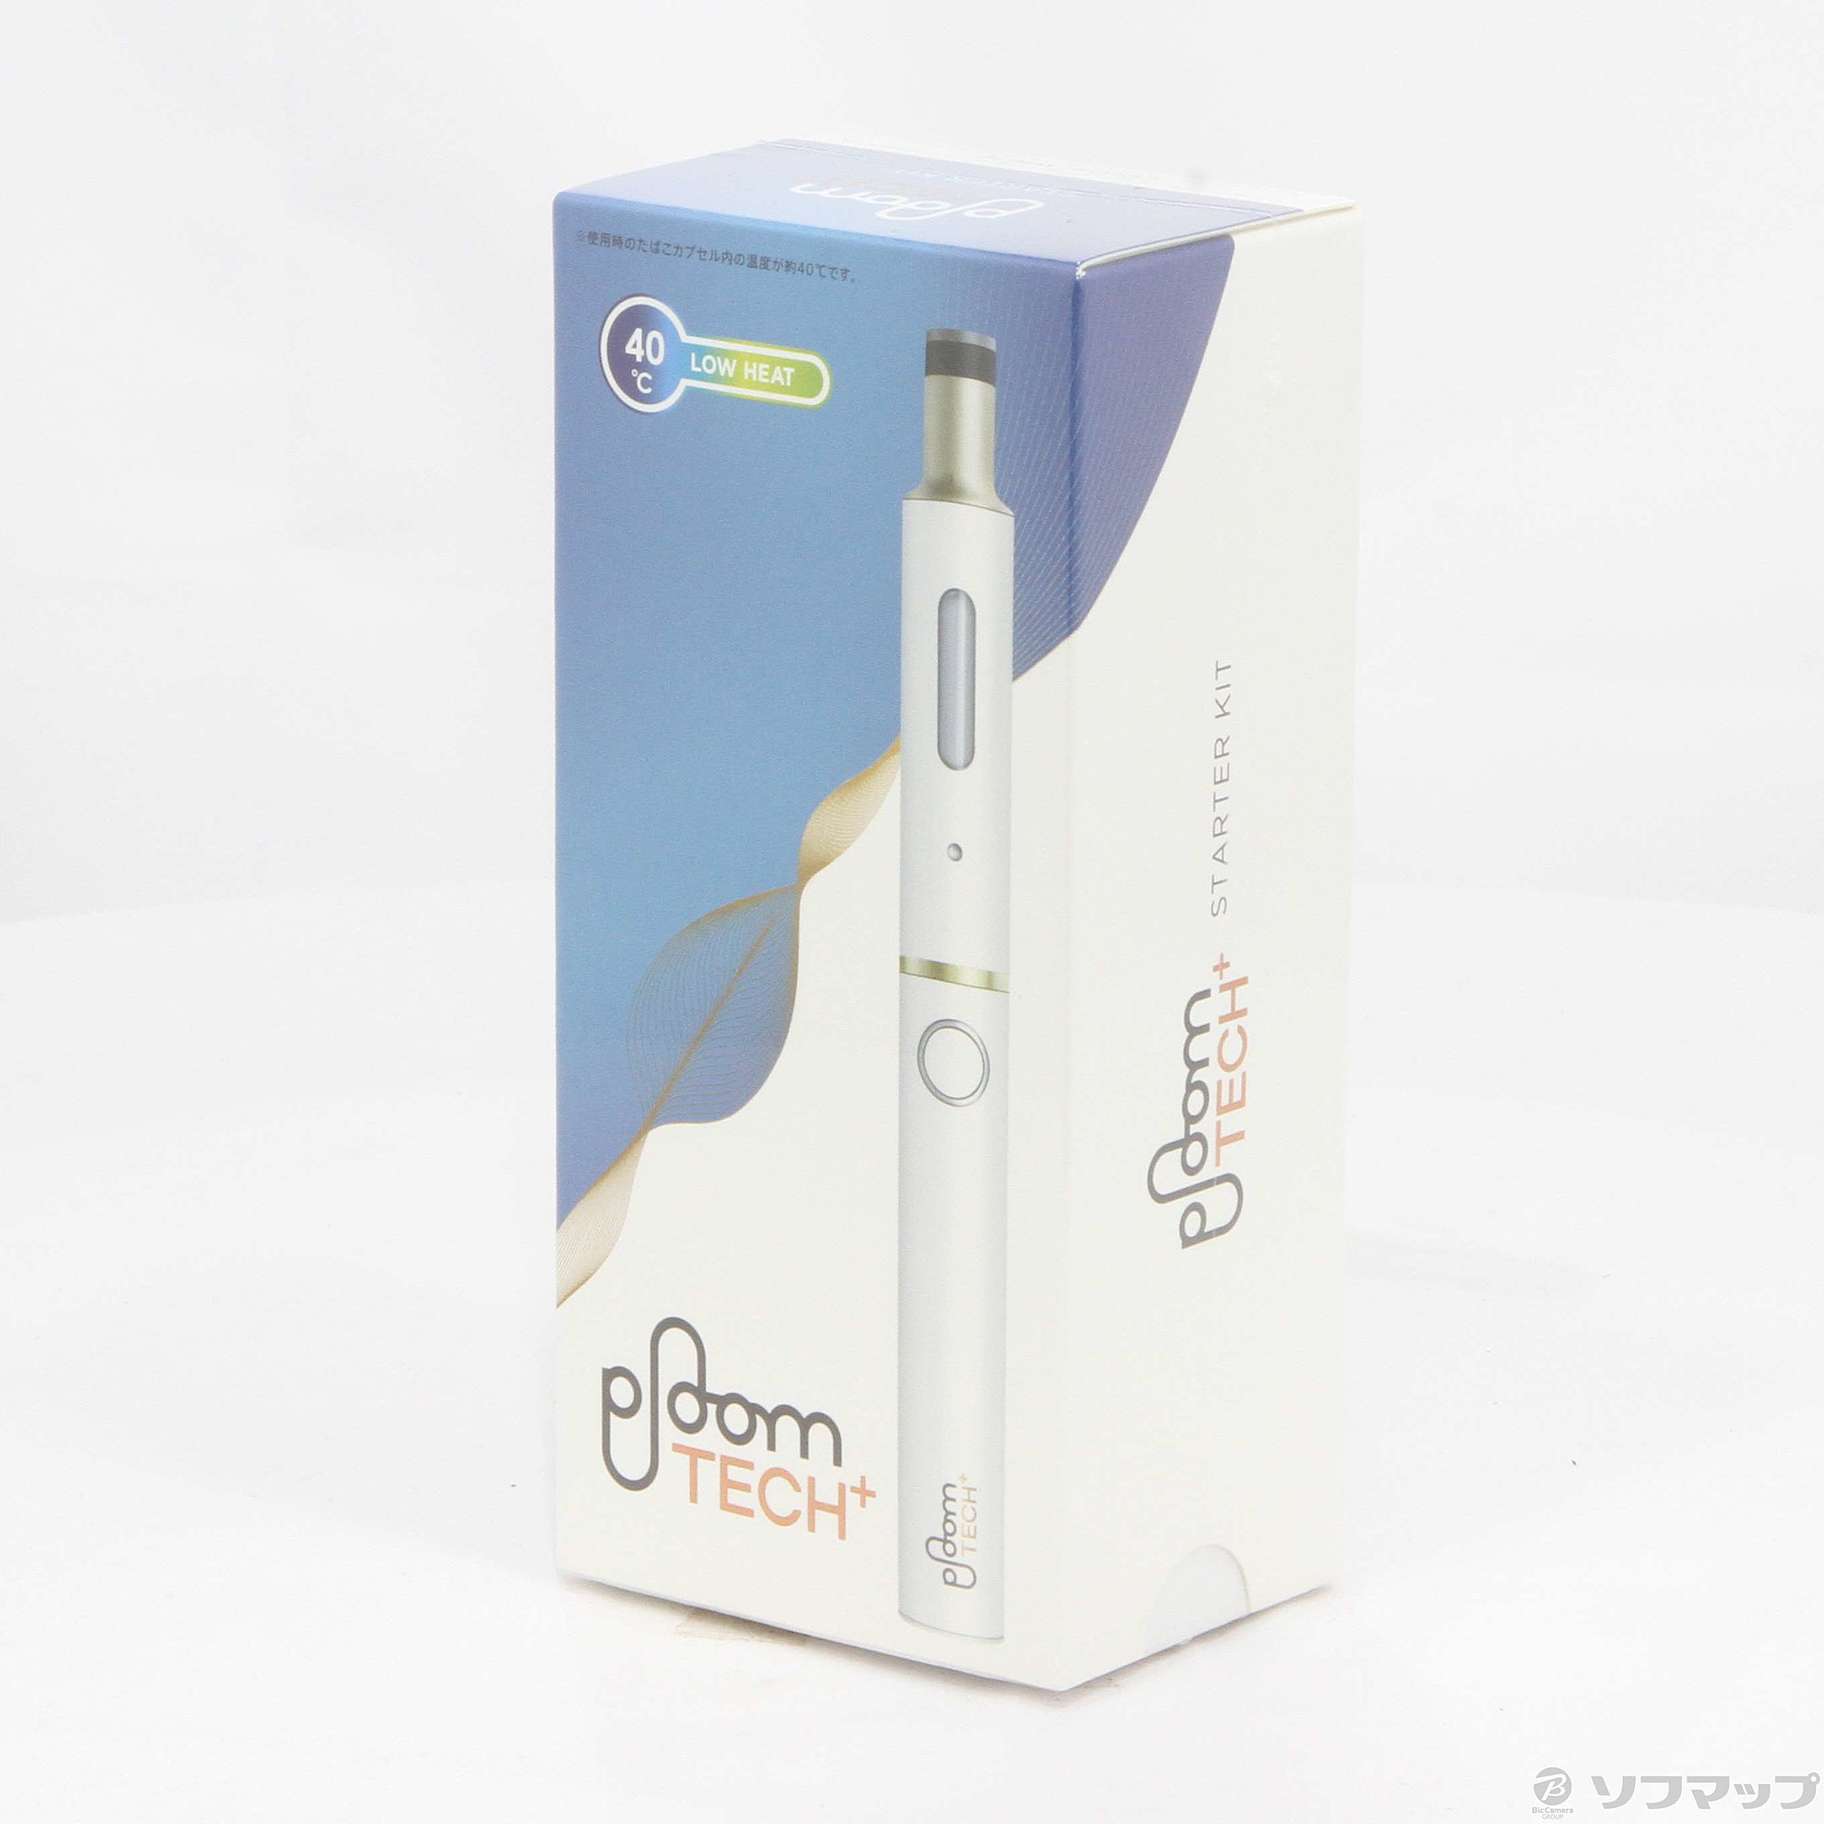 Ploom TECH + with スターターキット ホワイト　中古